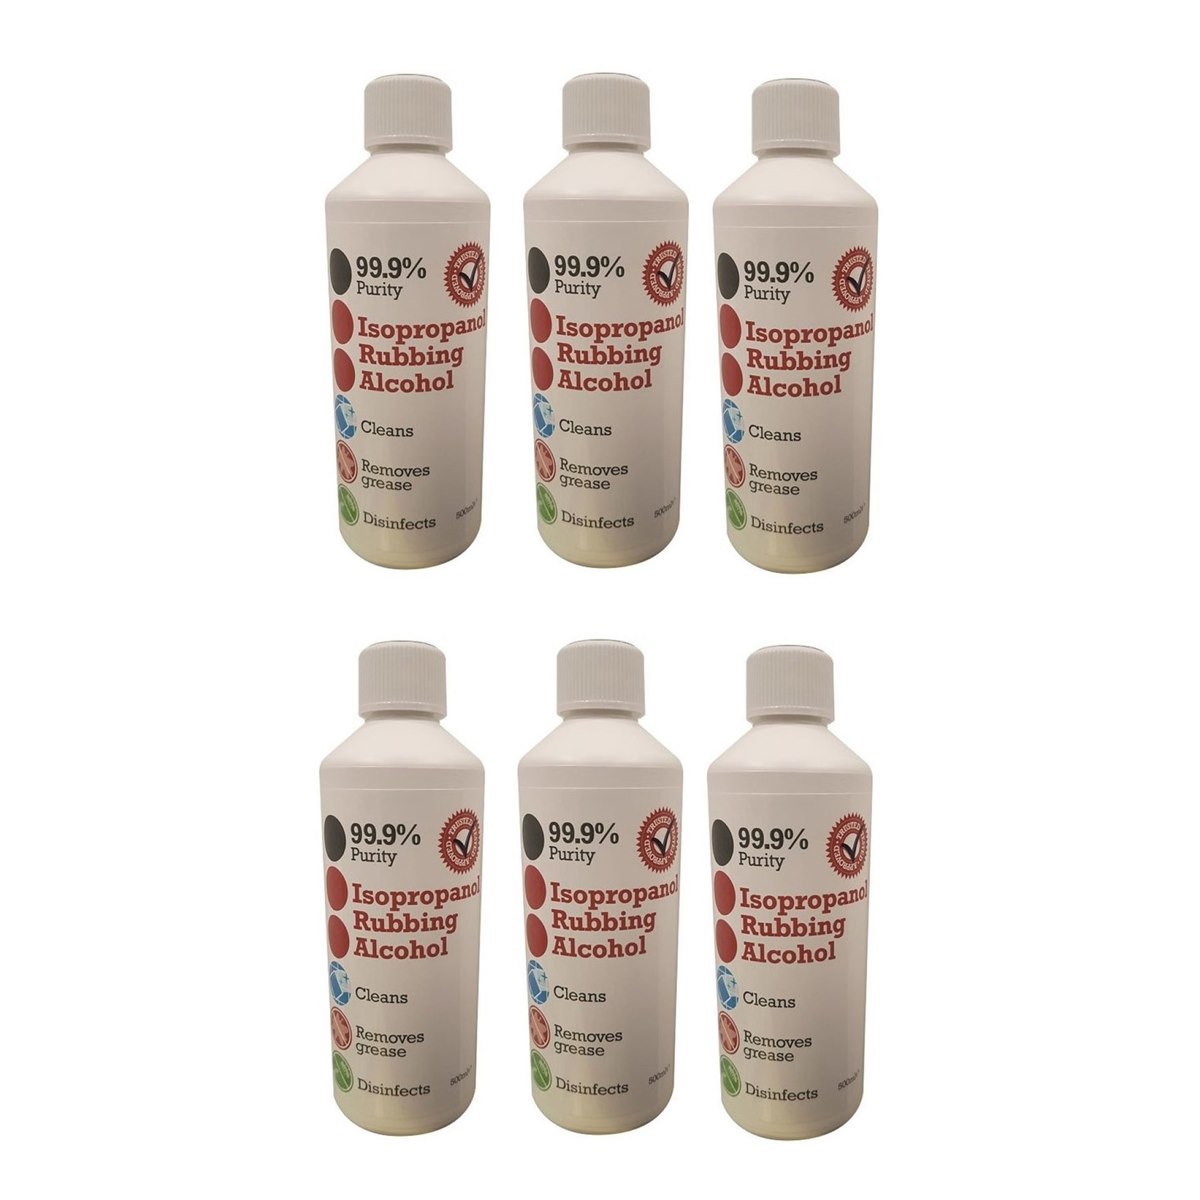 Case of 6 x Wilsons Isopropanol Rubbing Alcohol 99.9% Purity 500ml